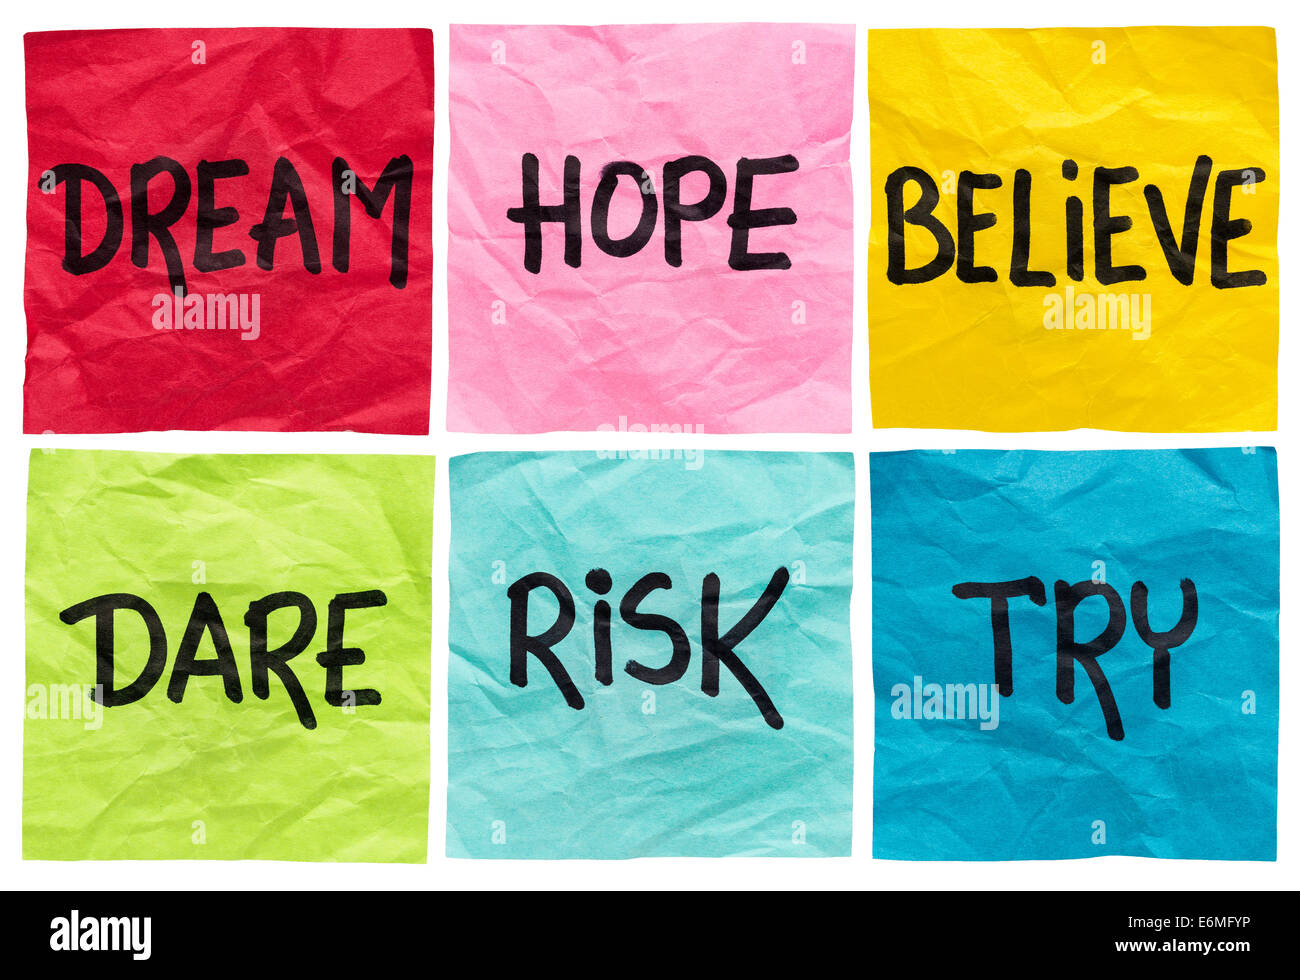 dream, hope, believe, dare, risk, try - motivational concept - a set of isolated crumpled sticky notes with handwritten advice a Stock Photo